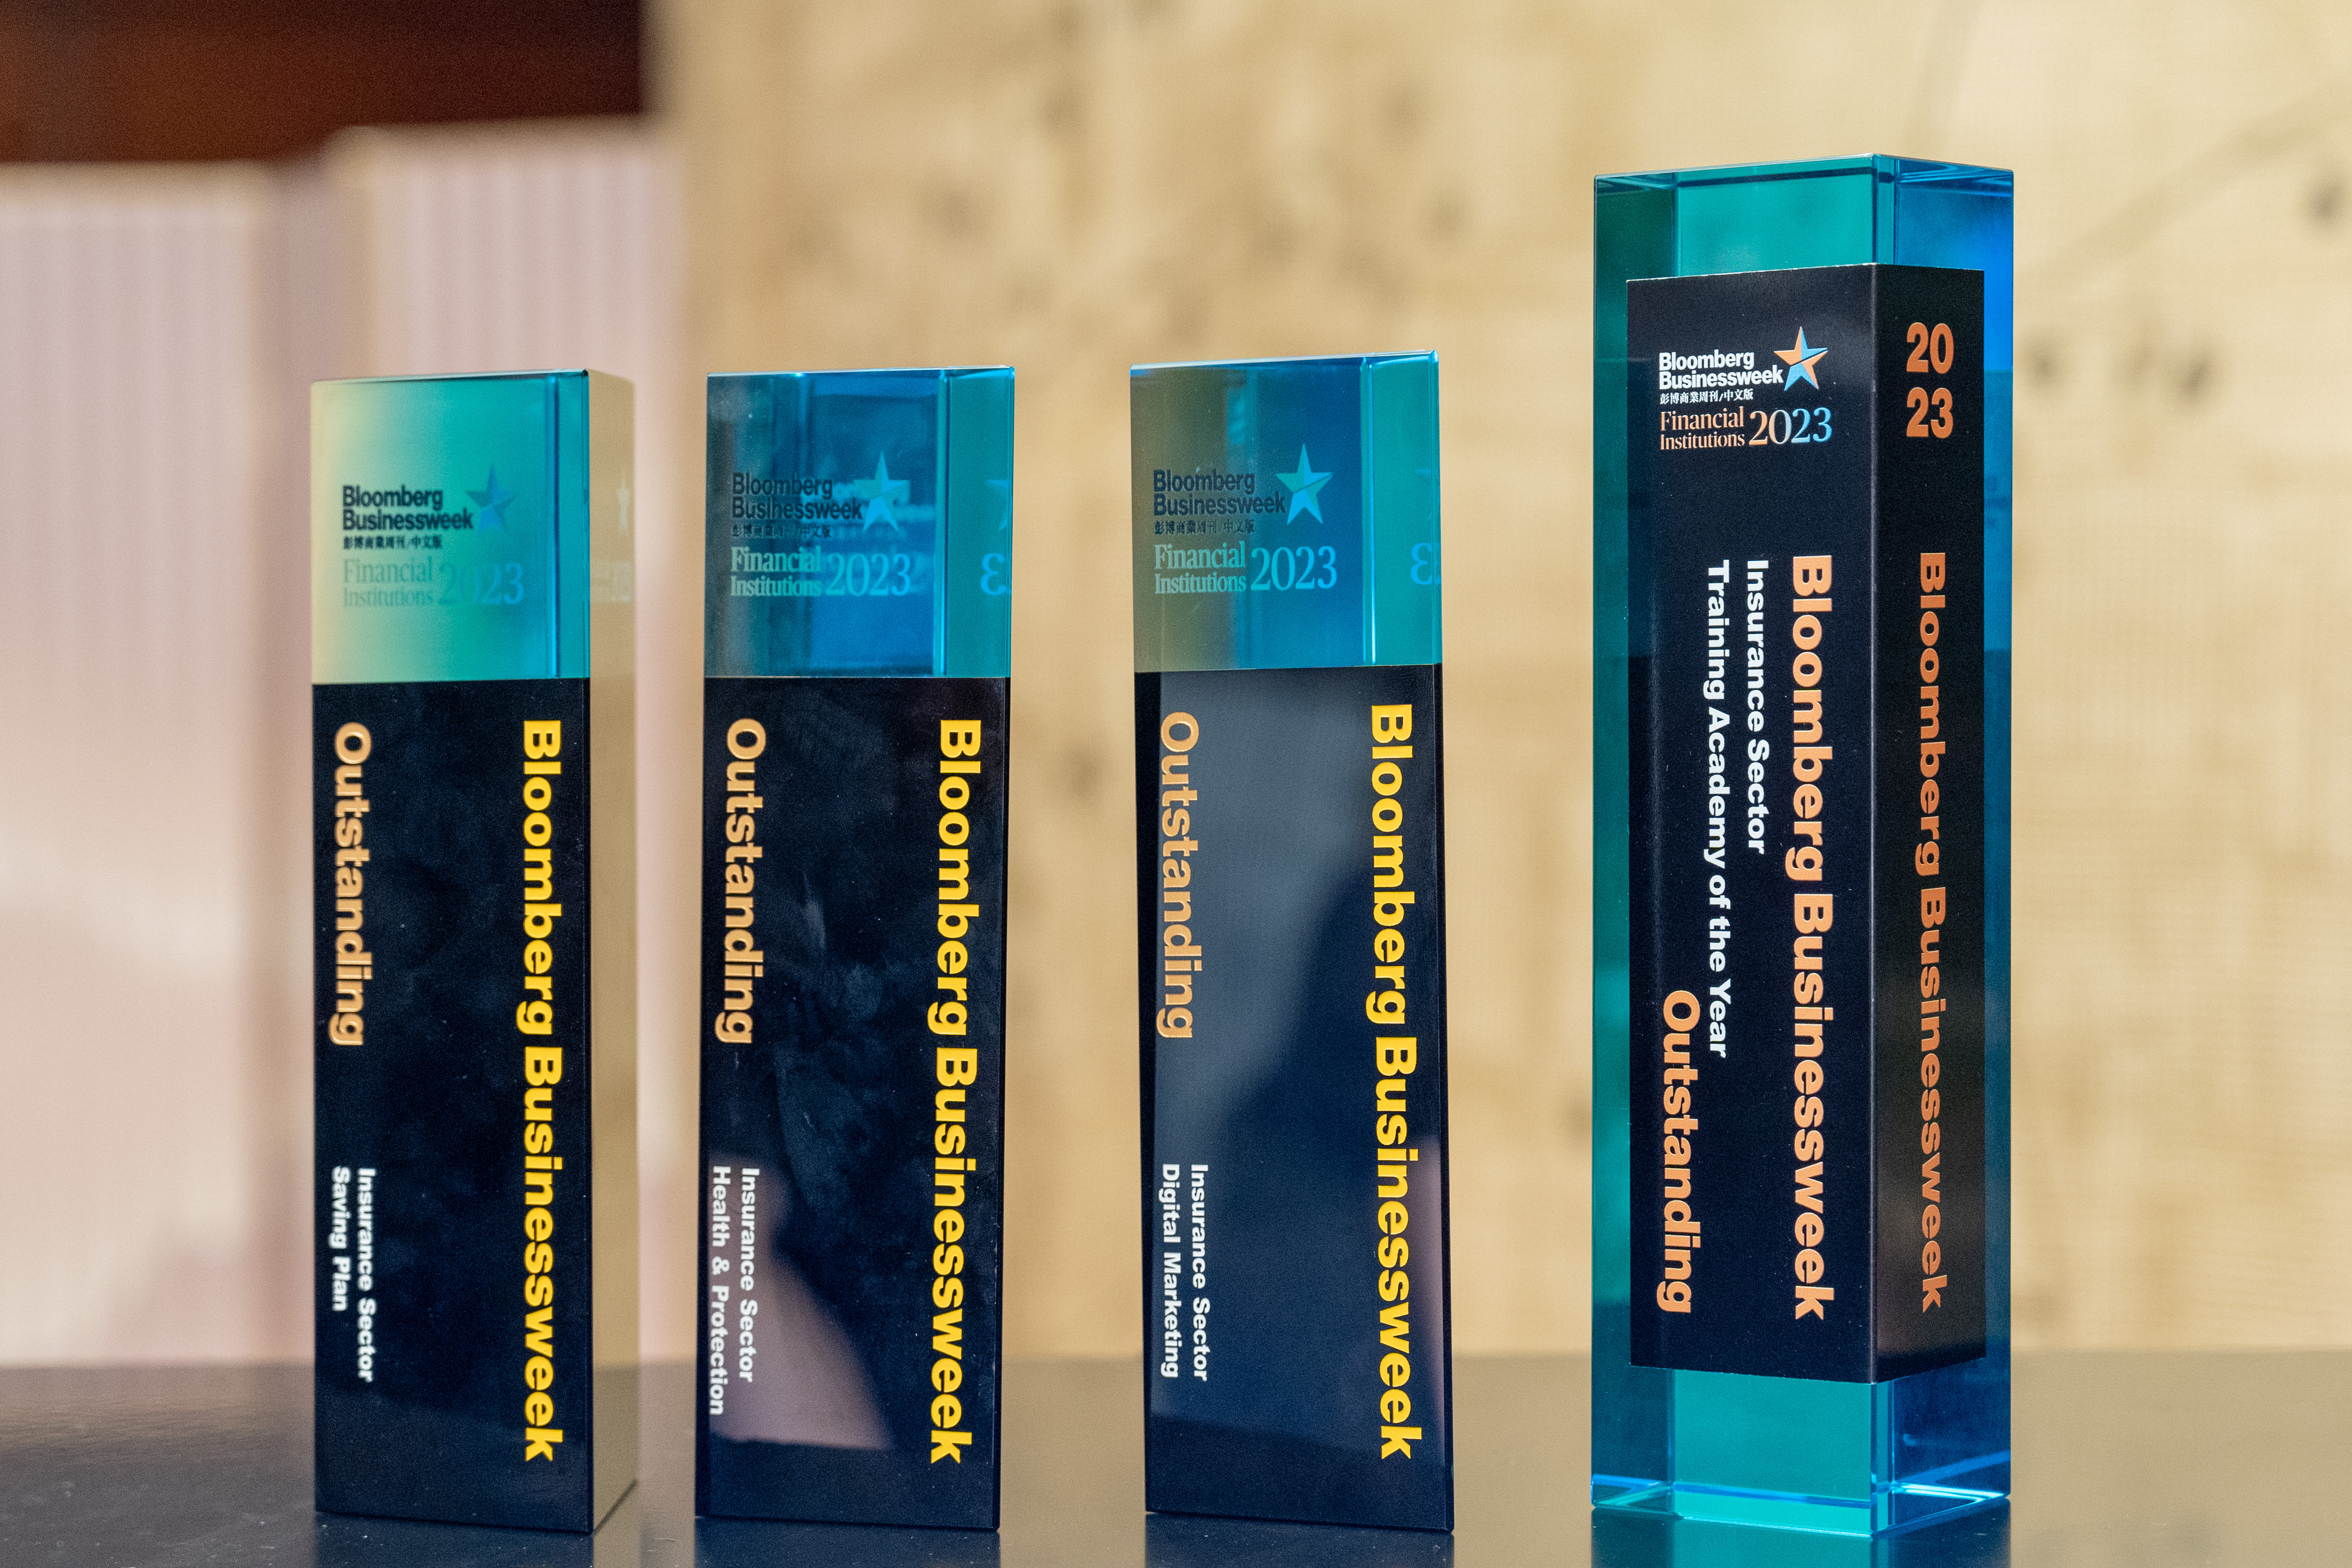 FTLife has swept four awards at the Bloomberg Businessweek / Chinese Edition Financial Institution Awards 2023 in recognition of its outstanding achievement in product development, talent development, and digital marketing strategies.